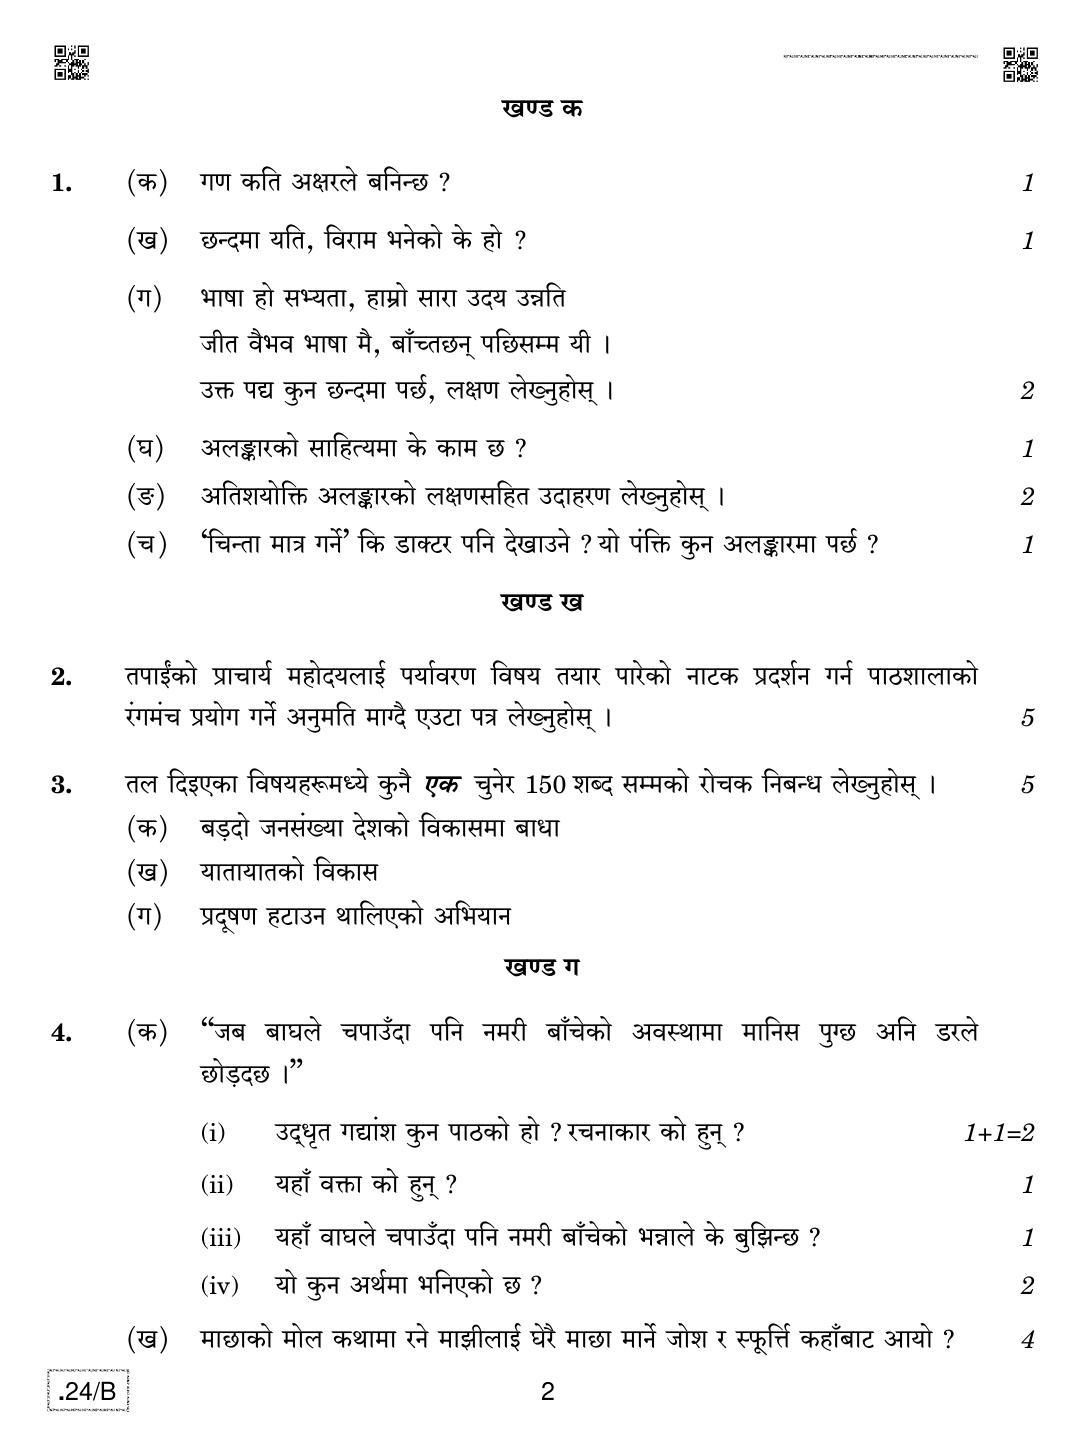 CBSE Class 12 Nepali 2020 Compartment Question Paper - Page 2